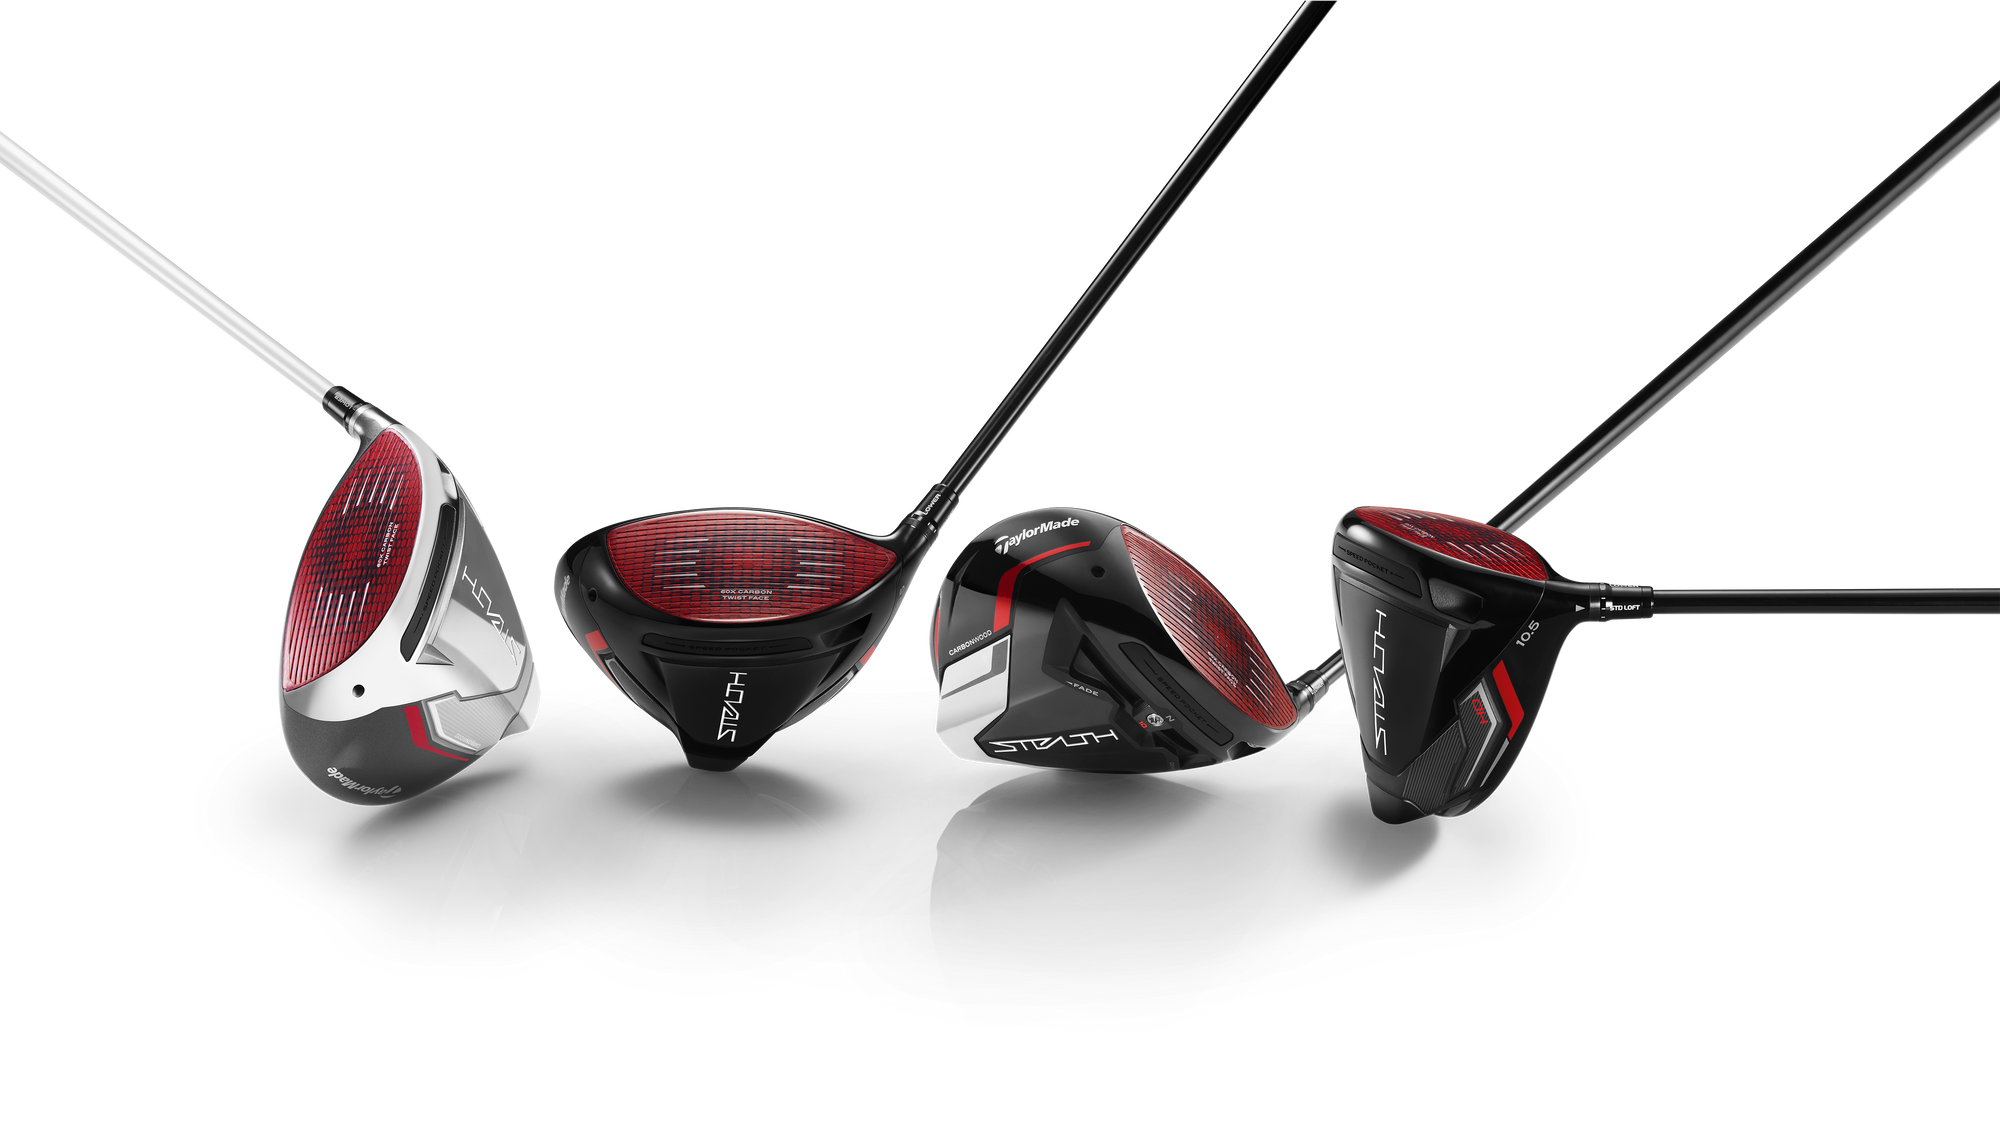 The TaylorMade STEALTH Driver